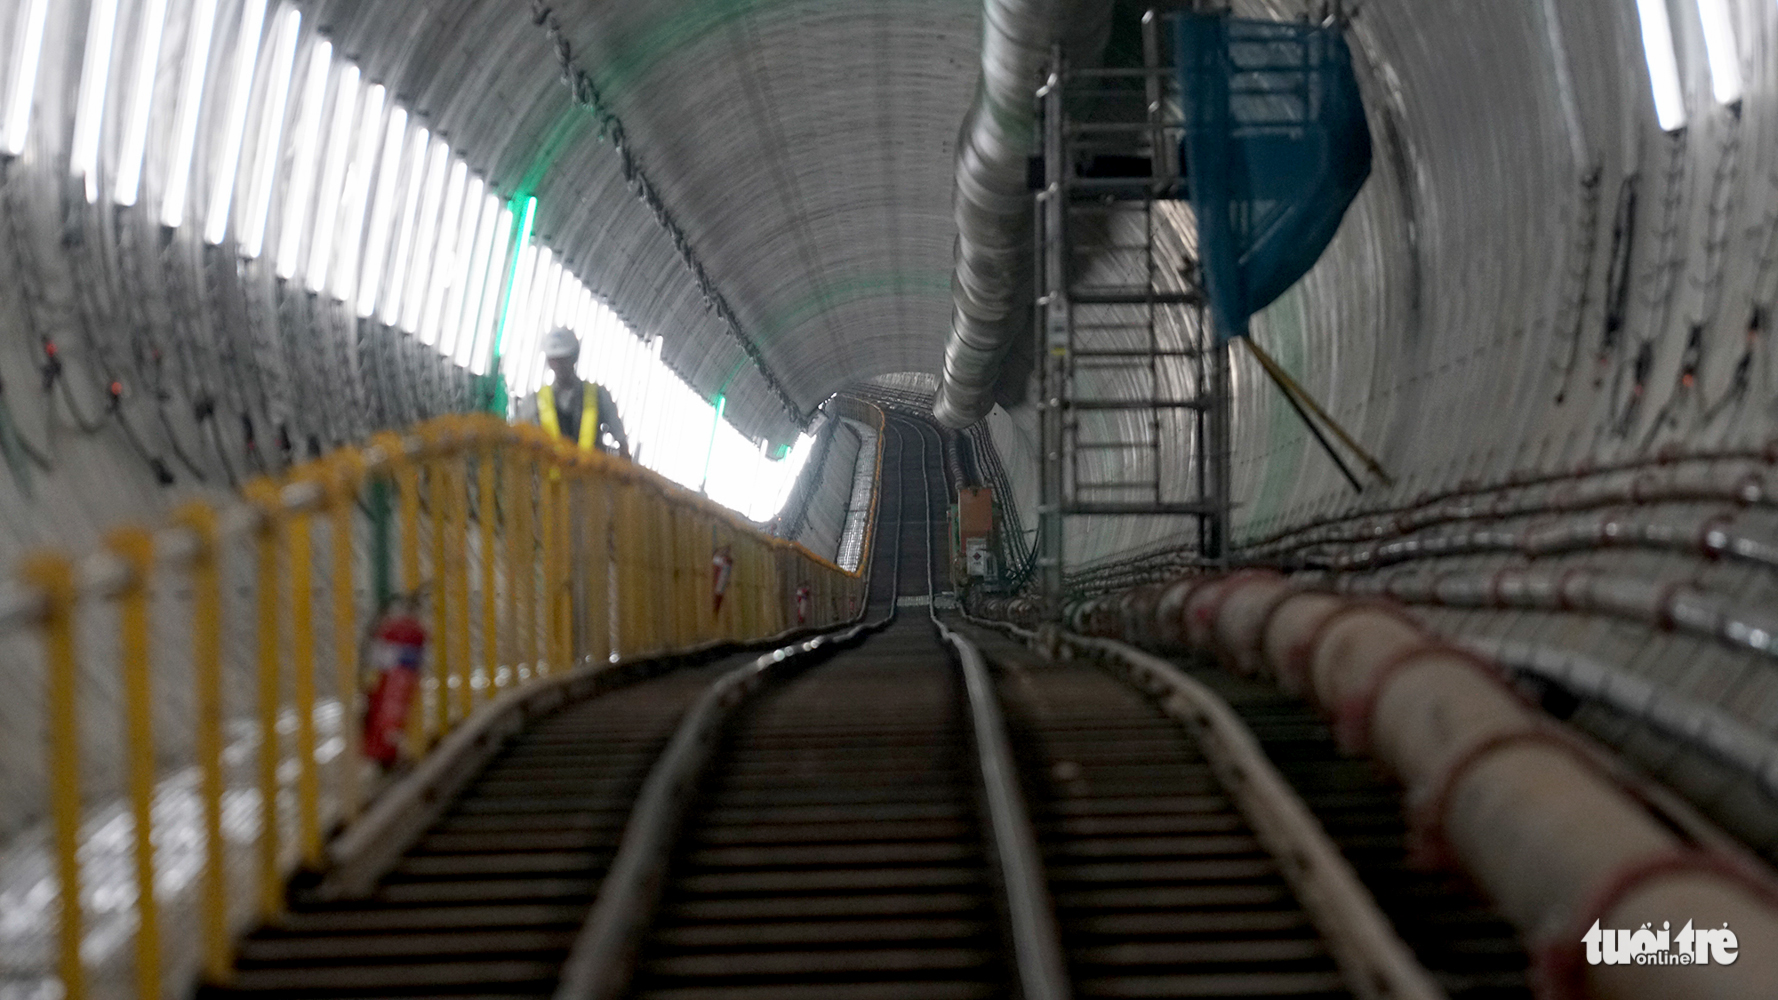 The railway has been installed on the the completed section of the tunnel.